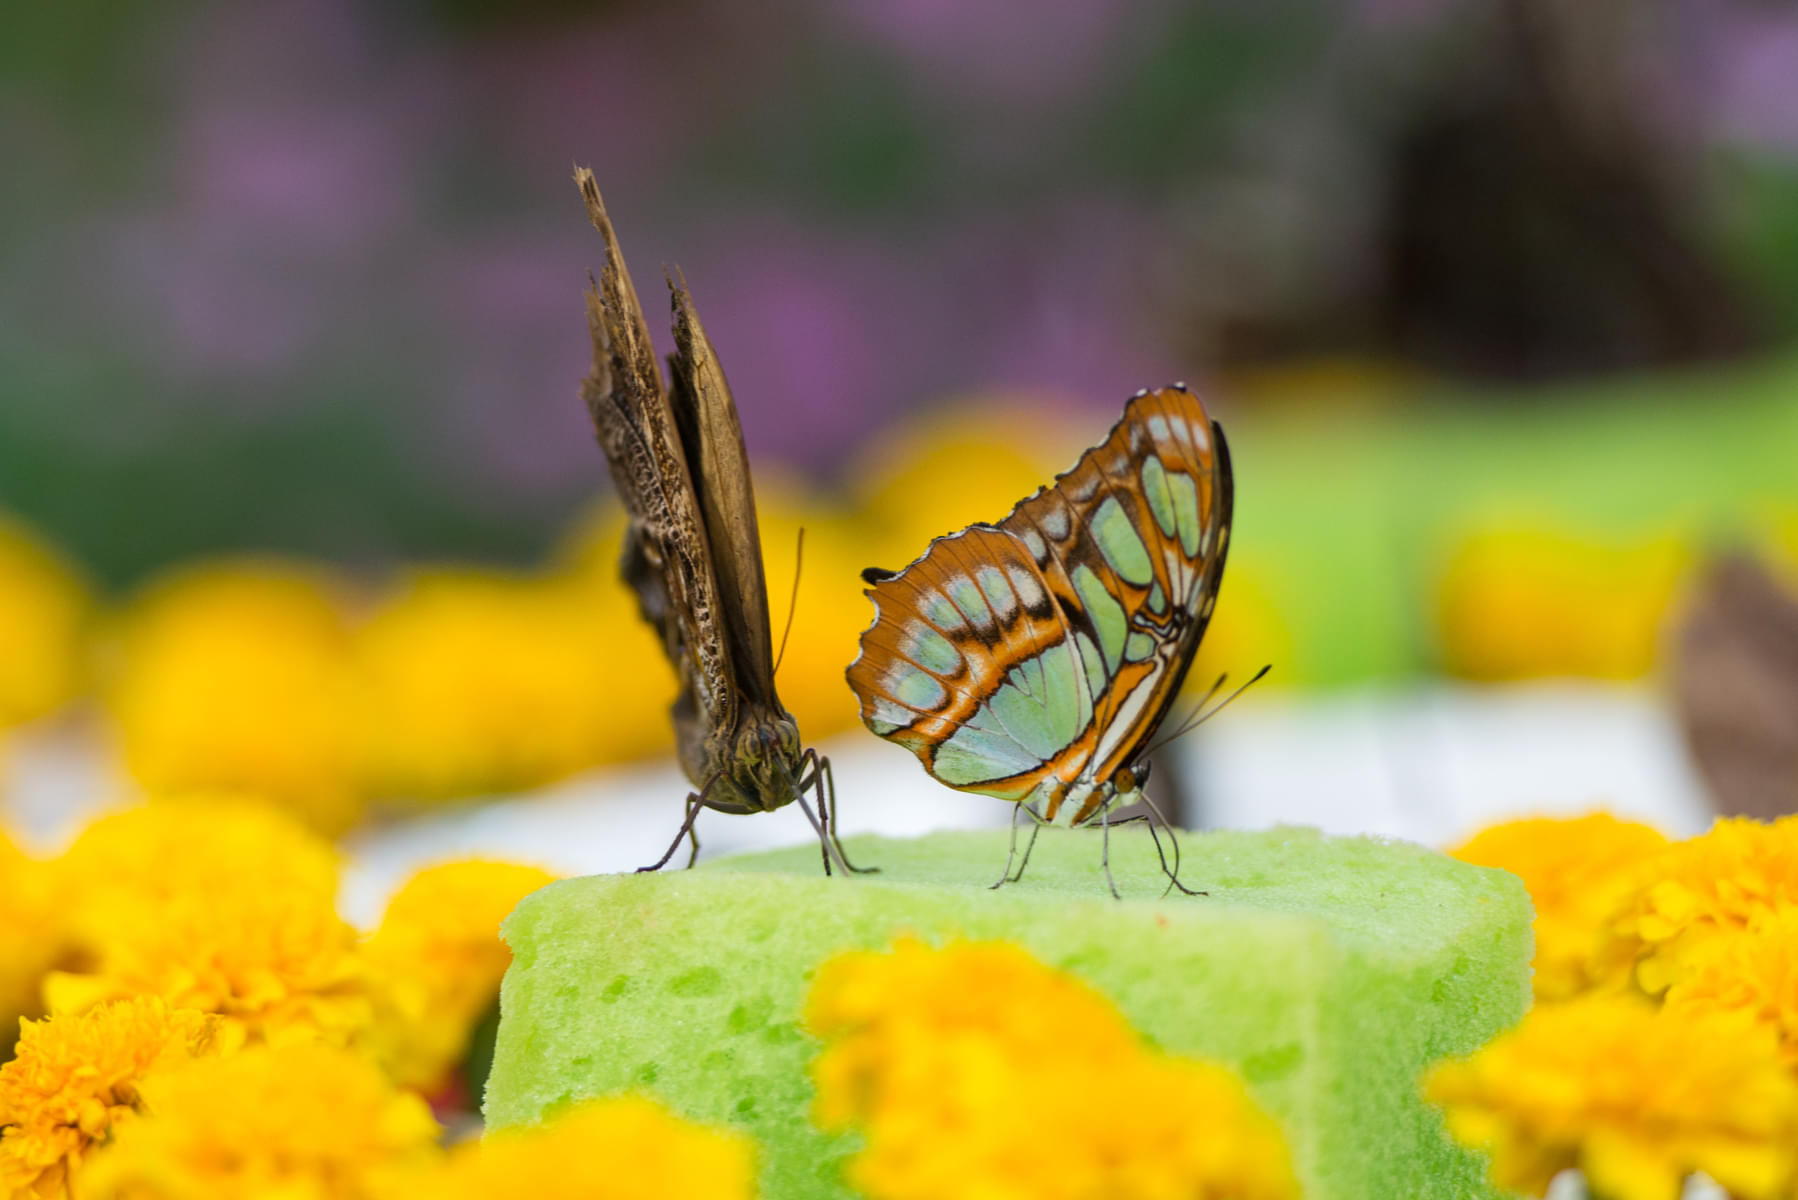 Get to know about different species of butterflies